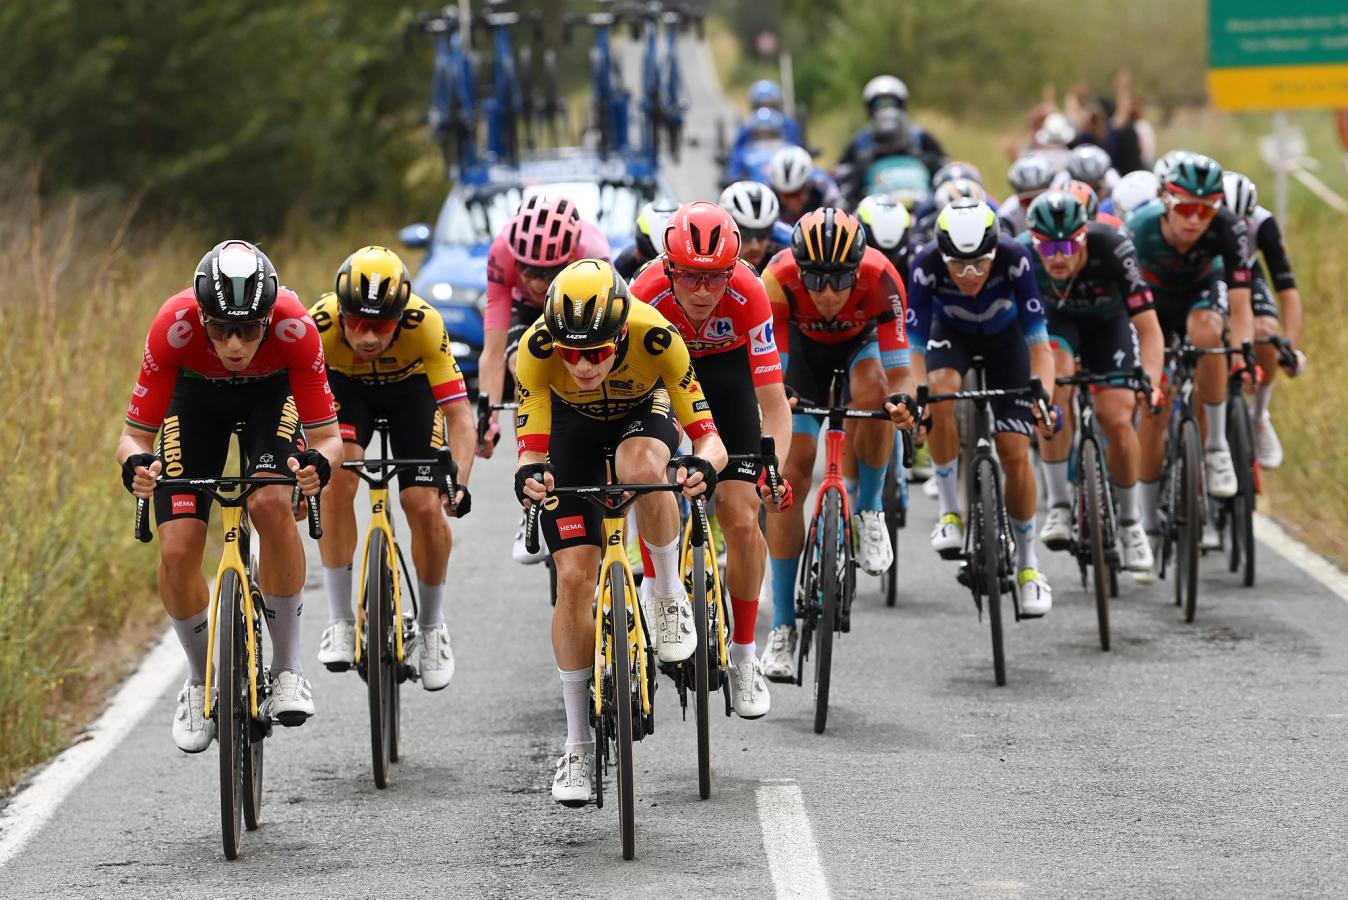 Jumbo-Visma decimated the peloton in the crosswinds at the beginning of stage 9